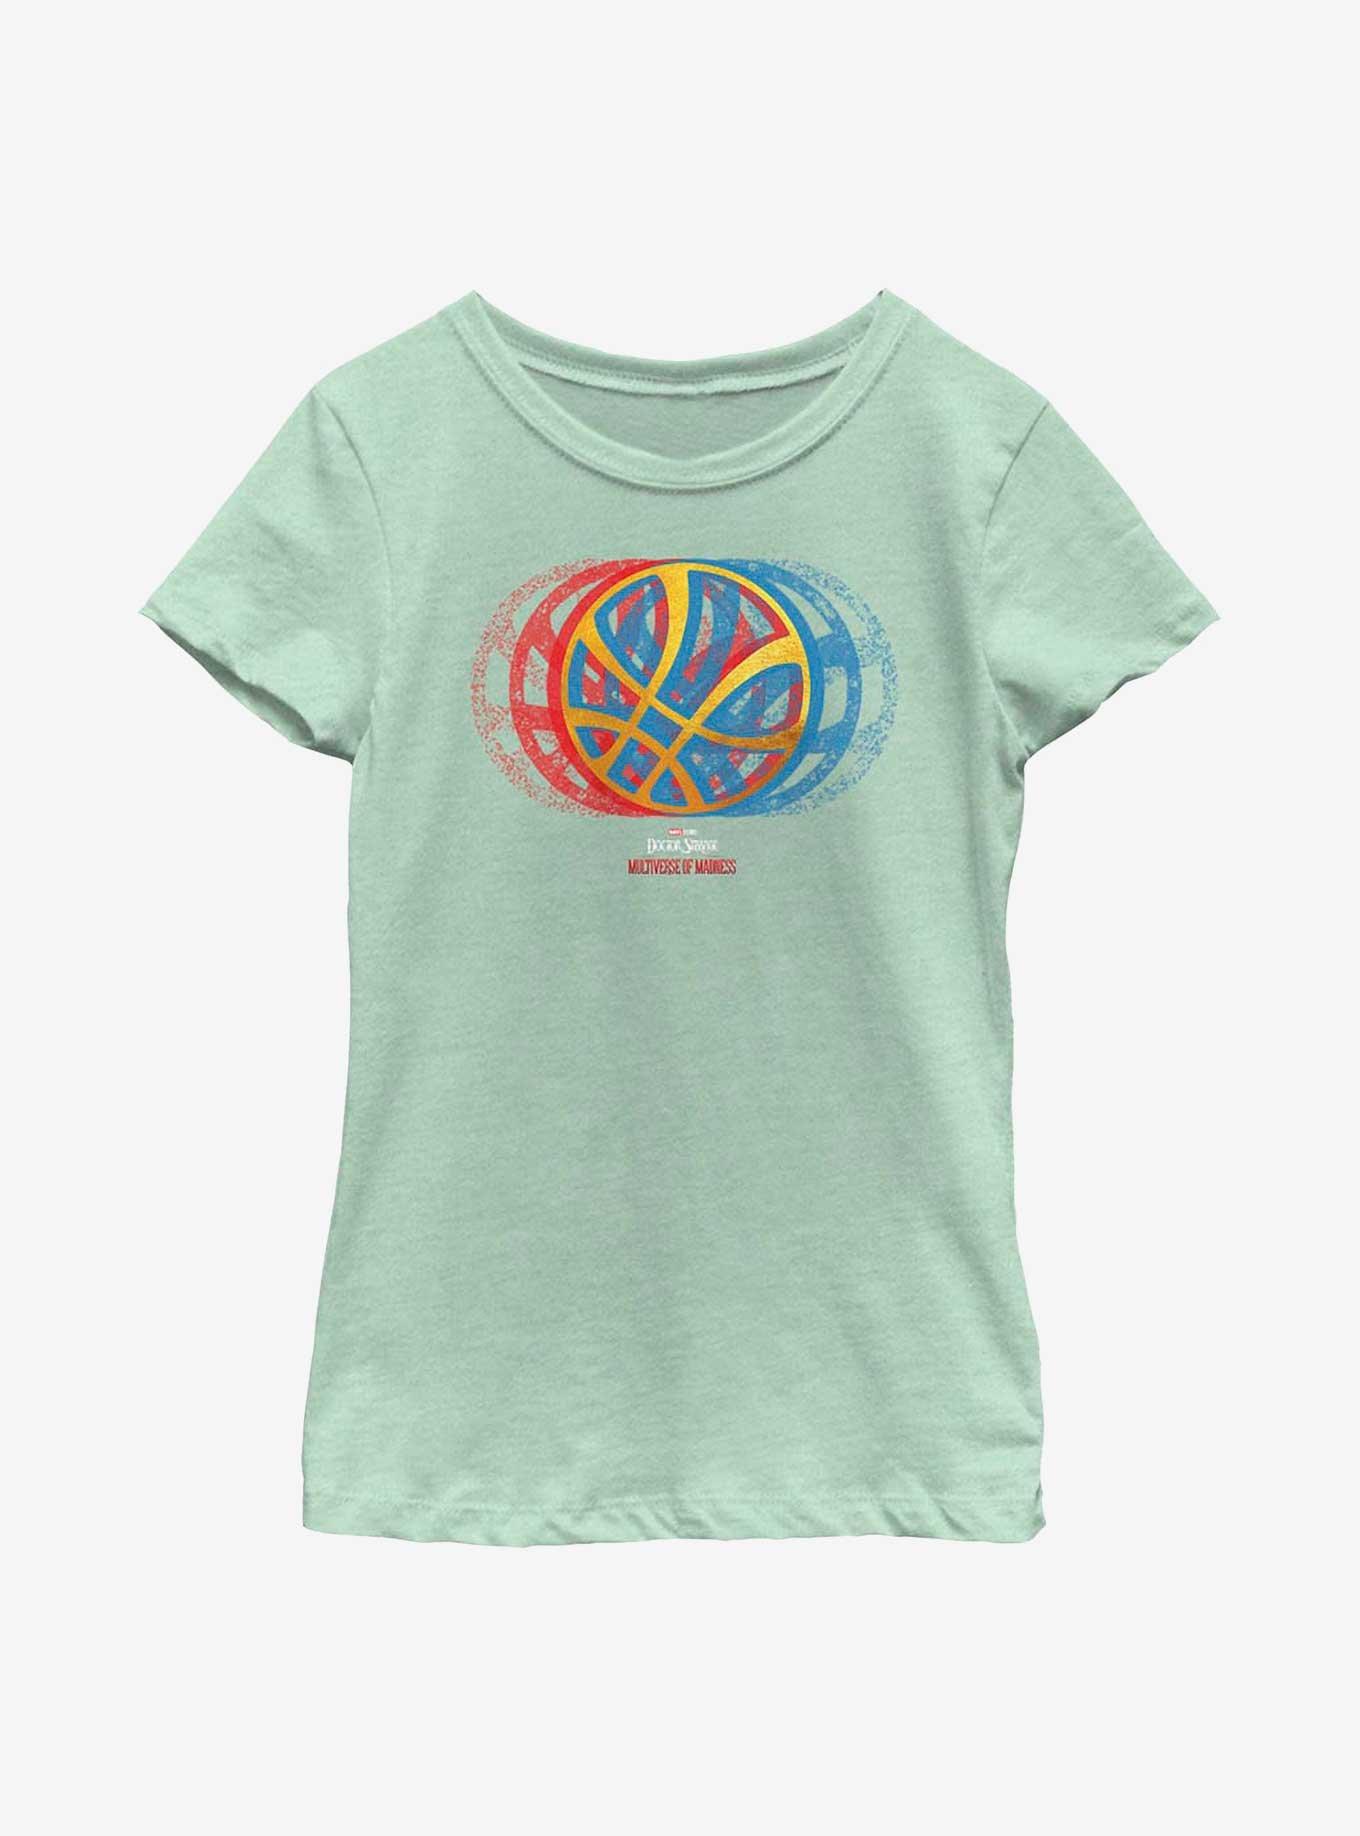 Marvel Doctor Strange In The Multiverse Of Madness Gradient Seal Youth Girls T-Shirt, MINT, hi-res